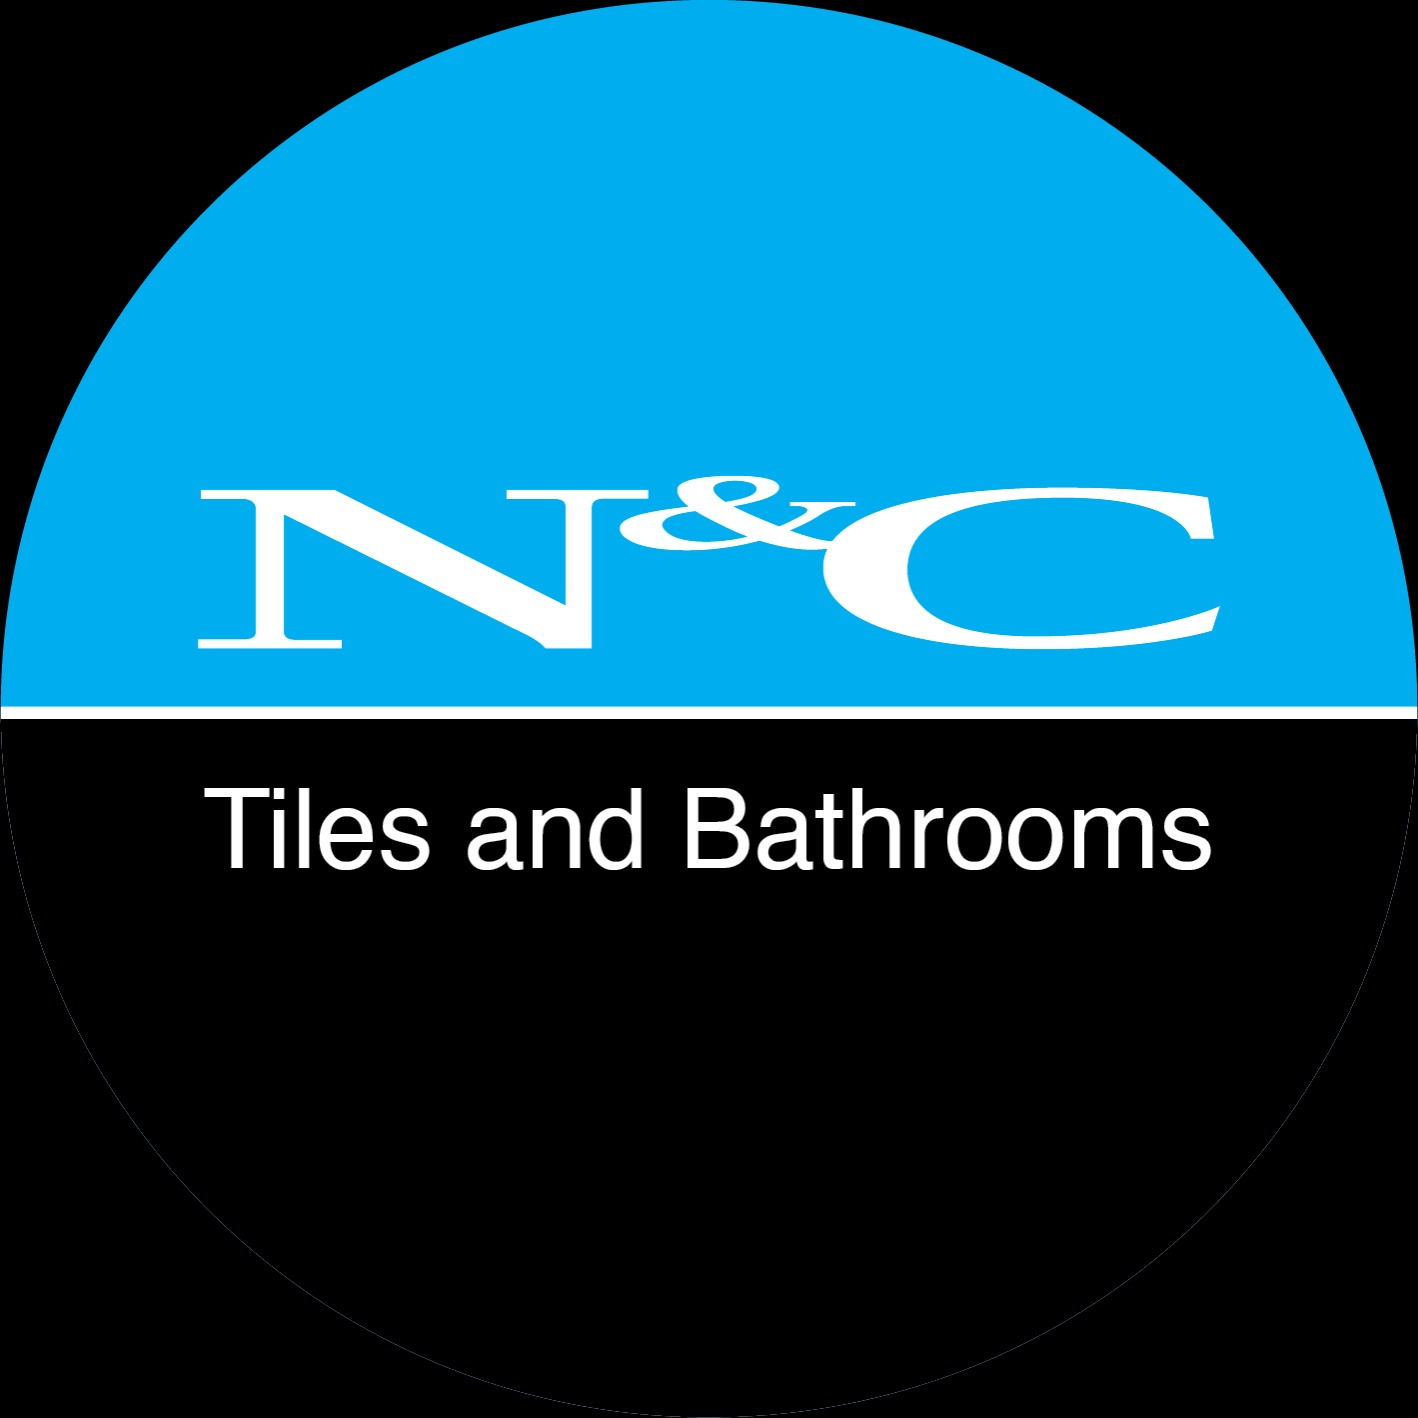 N&C Tiles and Bathrooms Colchester - Colchester, Essex CO4 9HY - 01206 849300 | ShowMeLocal.com